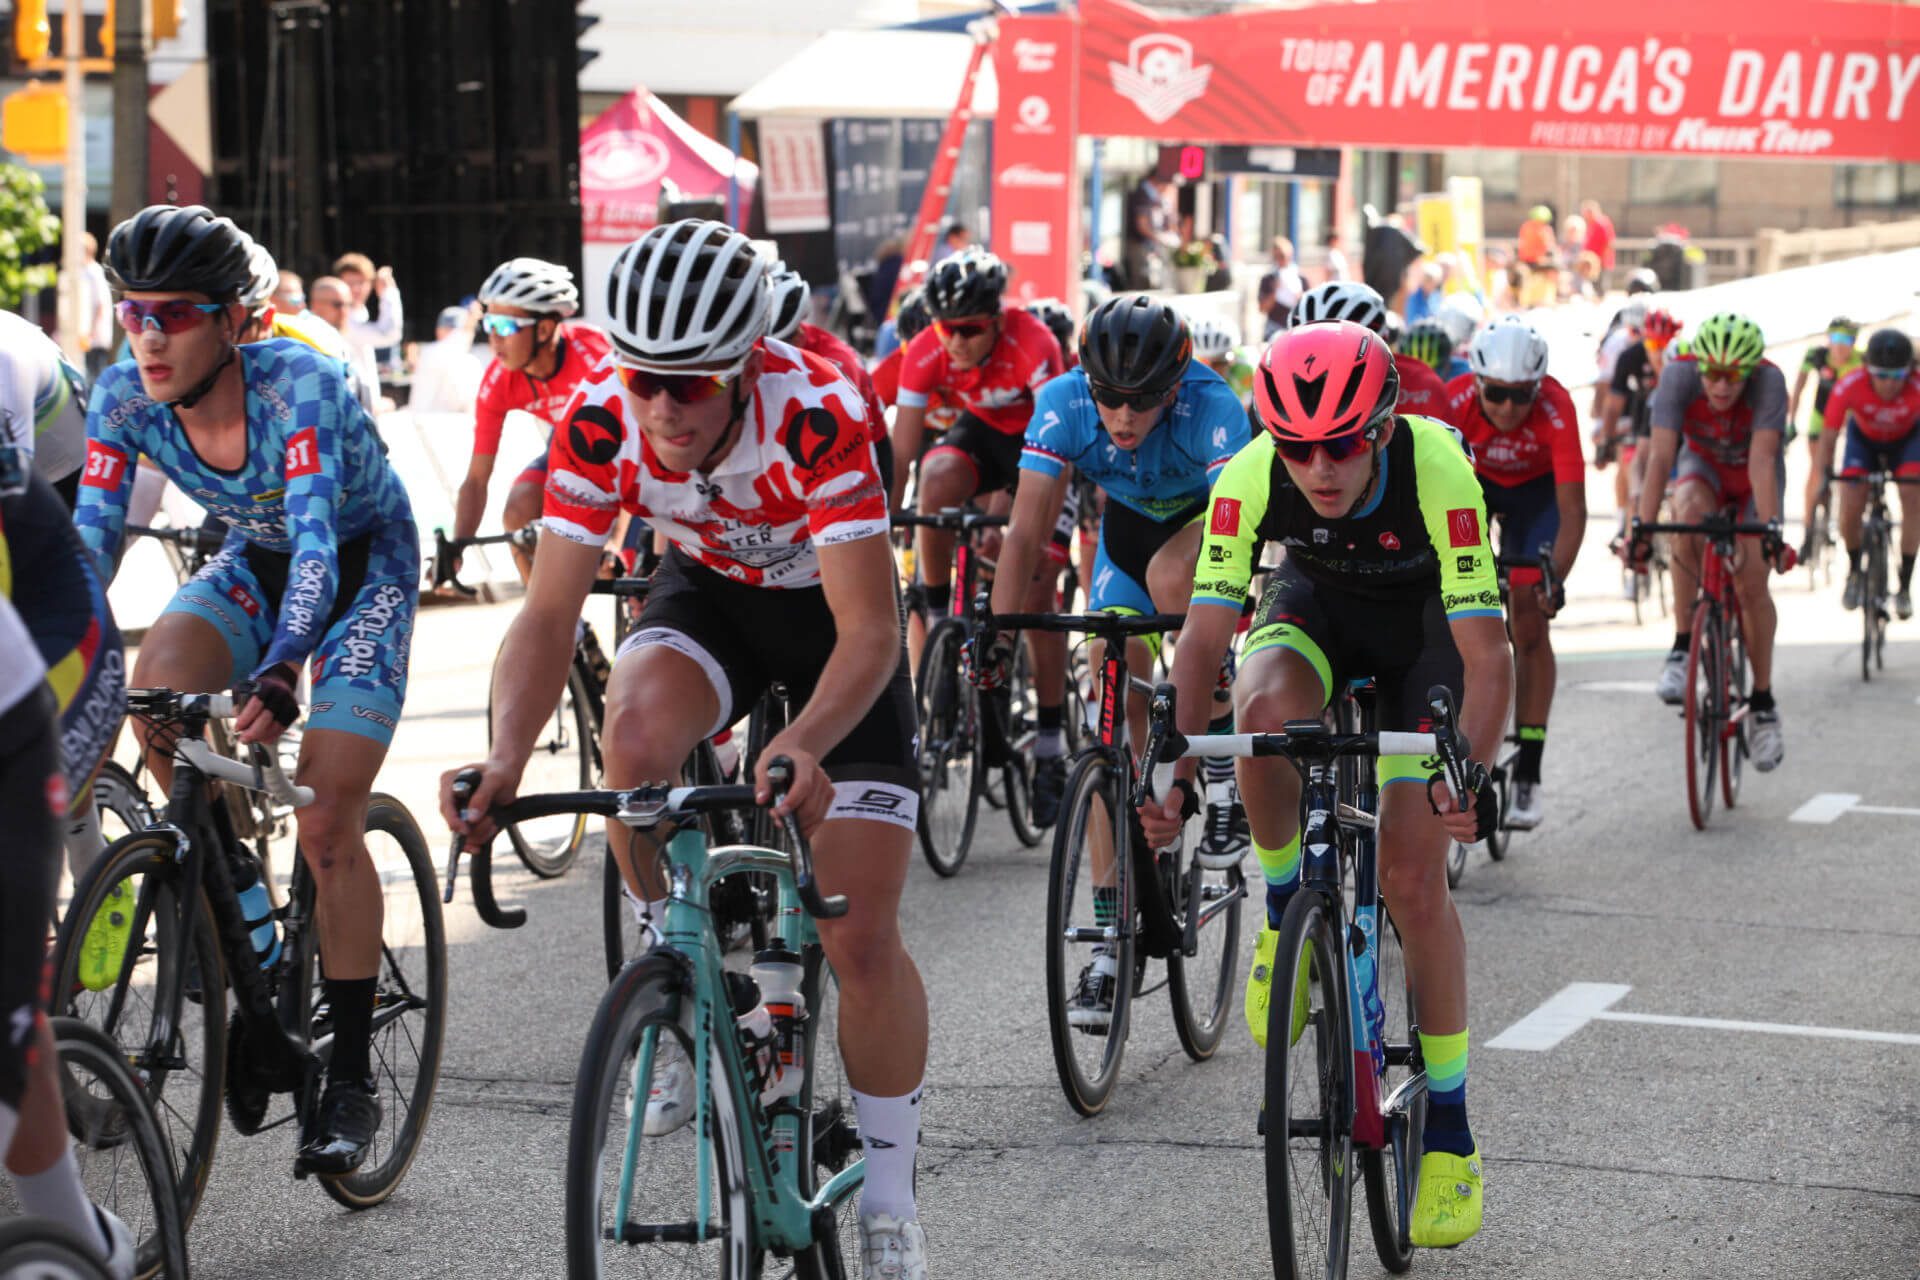 A group of bicyclists race during the Tour of America's Dairyland Series in downtown Janesville.